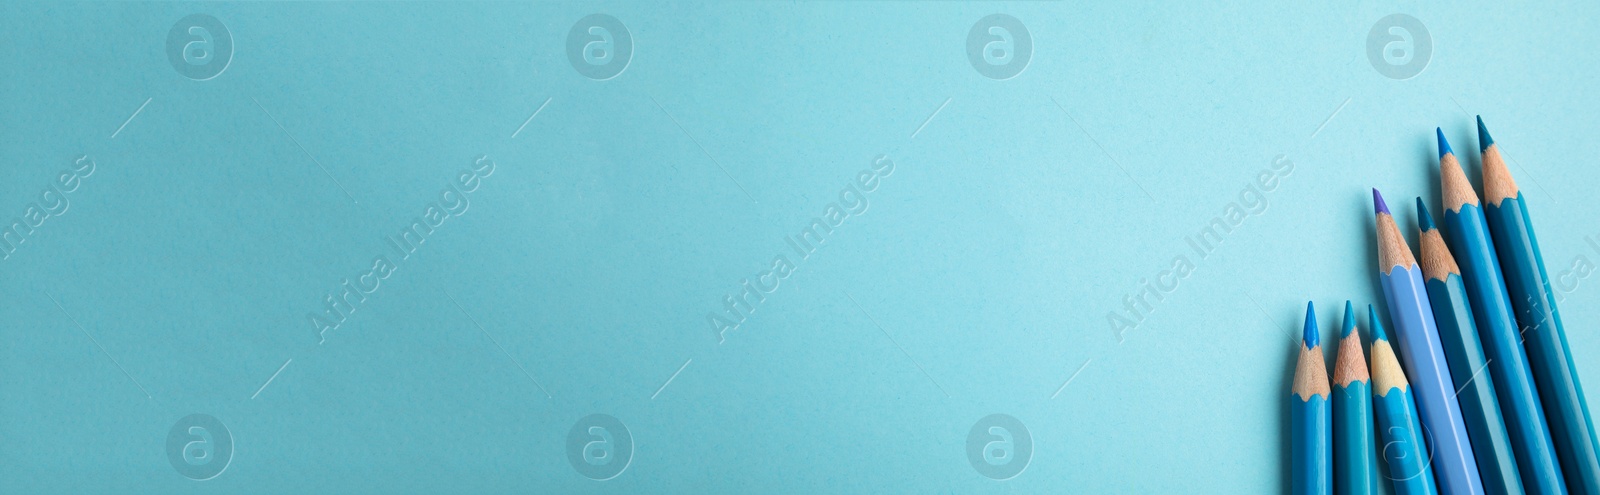 Image of Many color pencils on light blue background, flat lay with space for text. Banner design